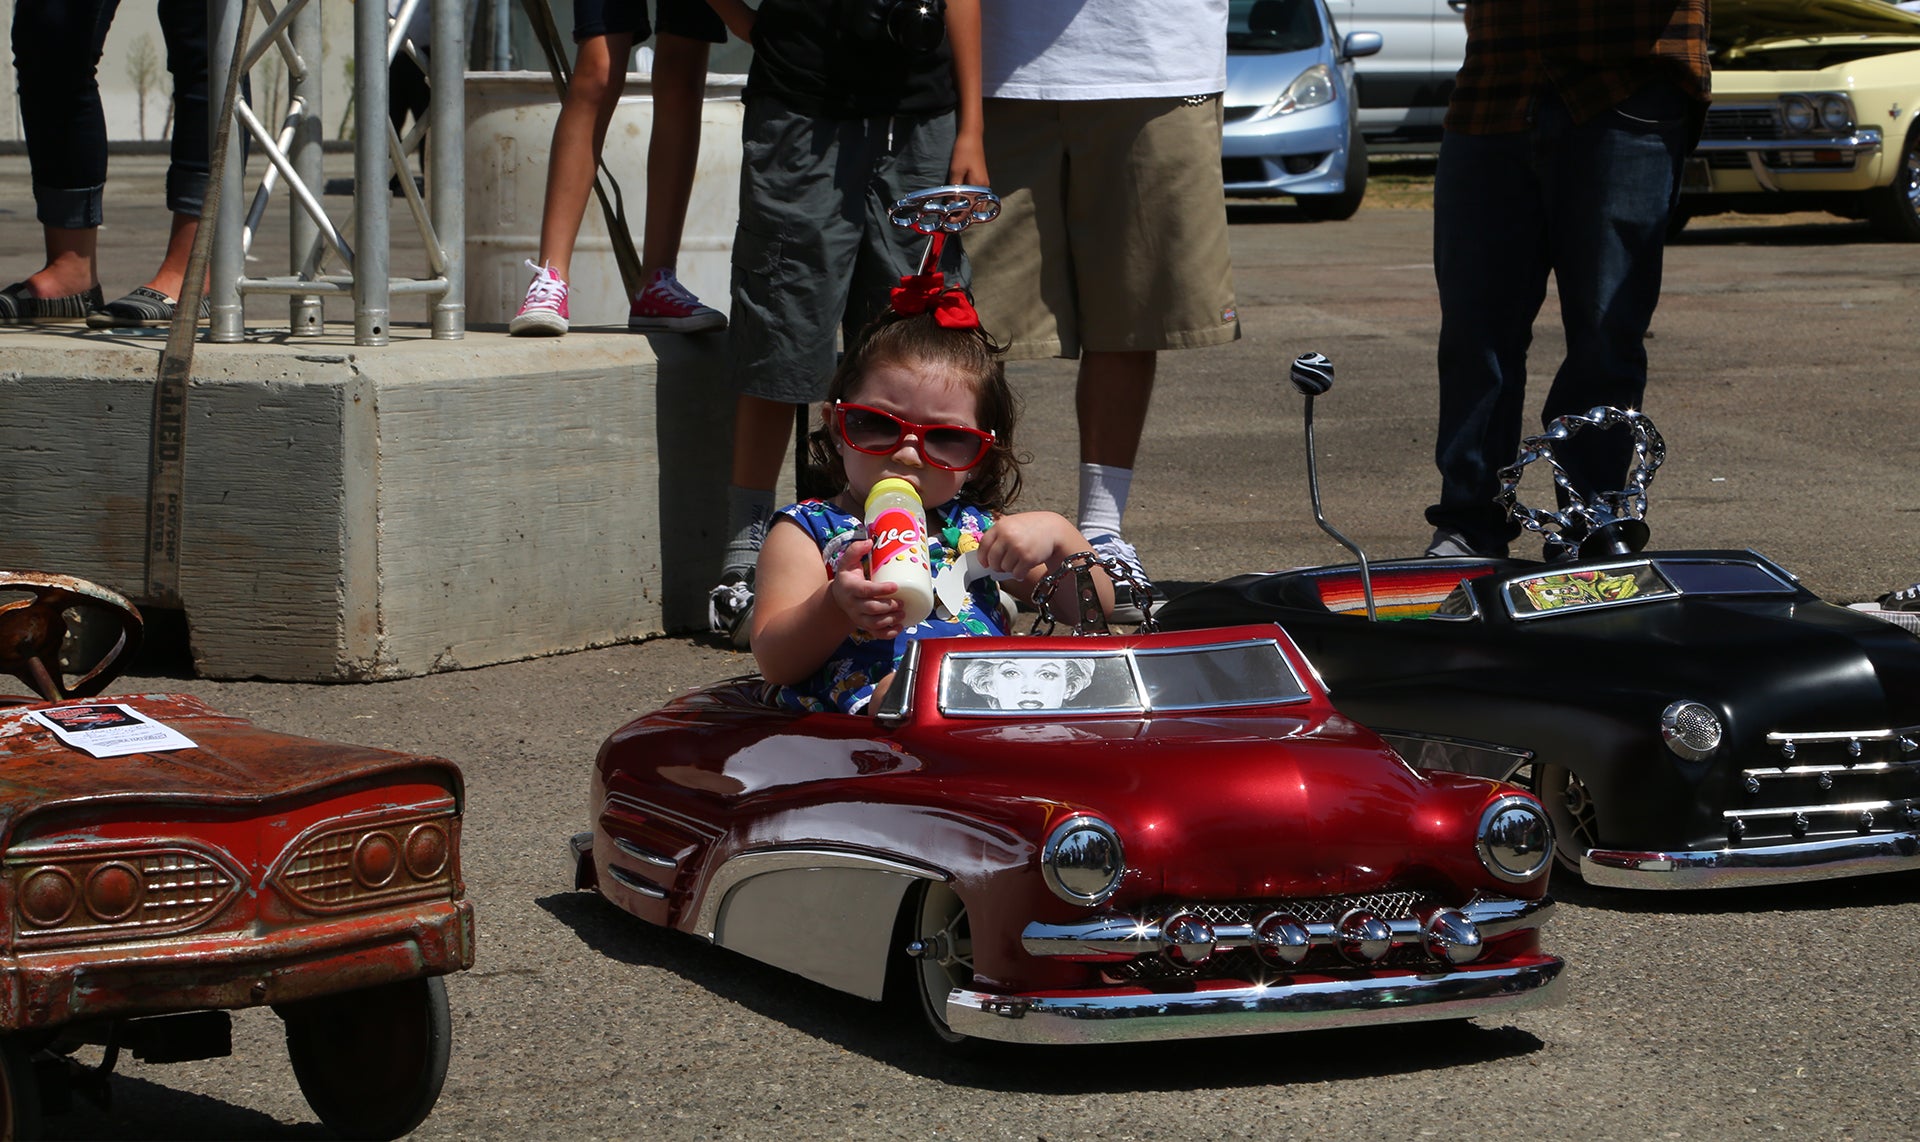 A lil lady enjoying the carshow in her toy car